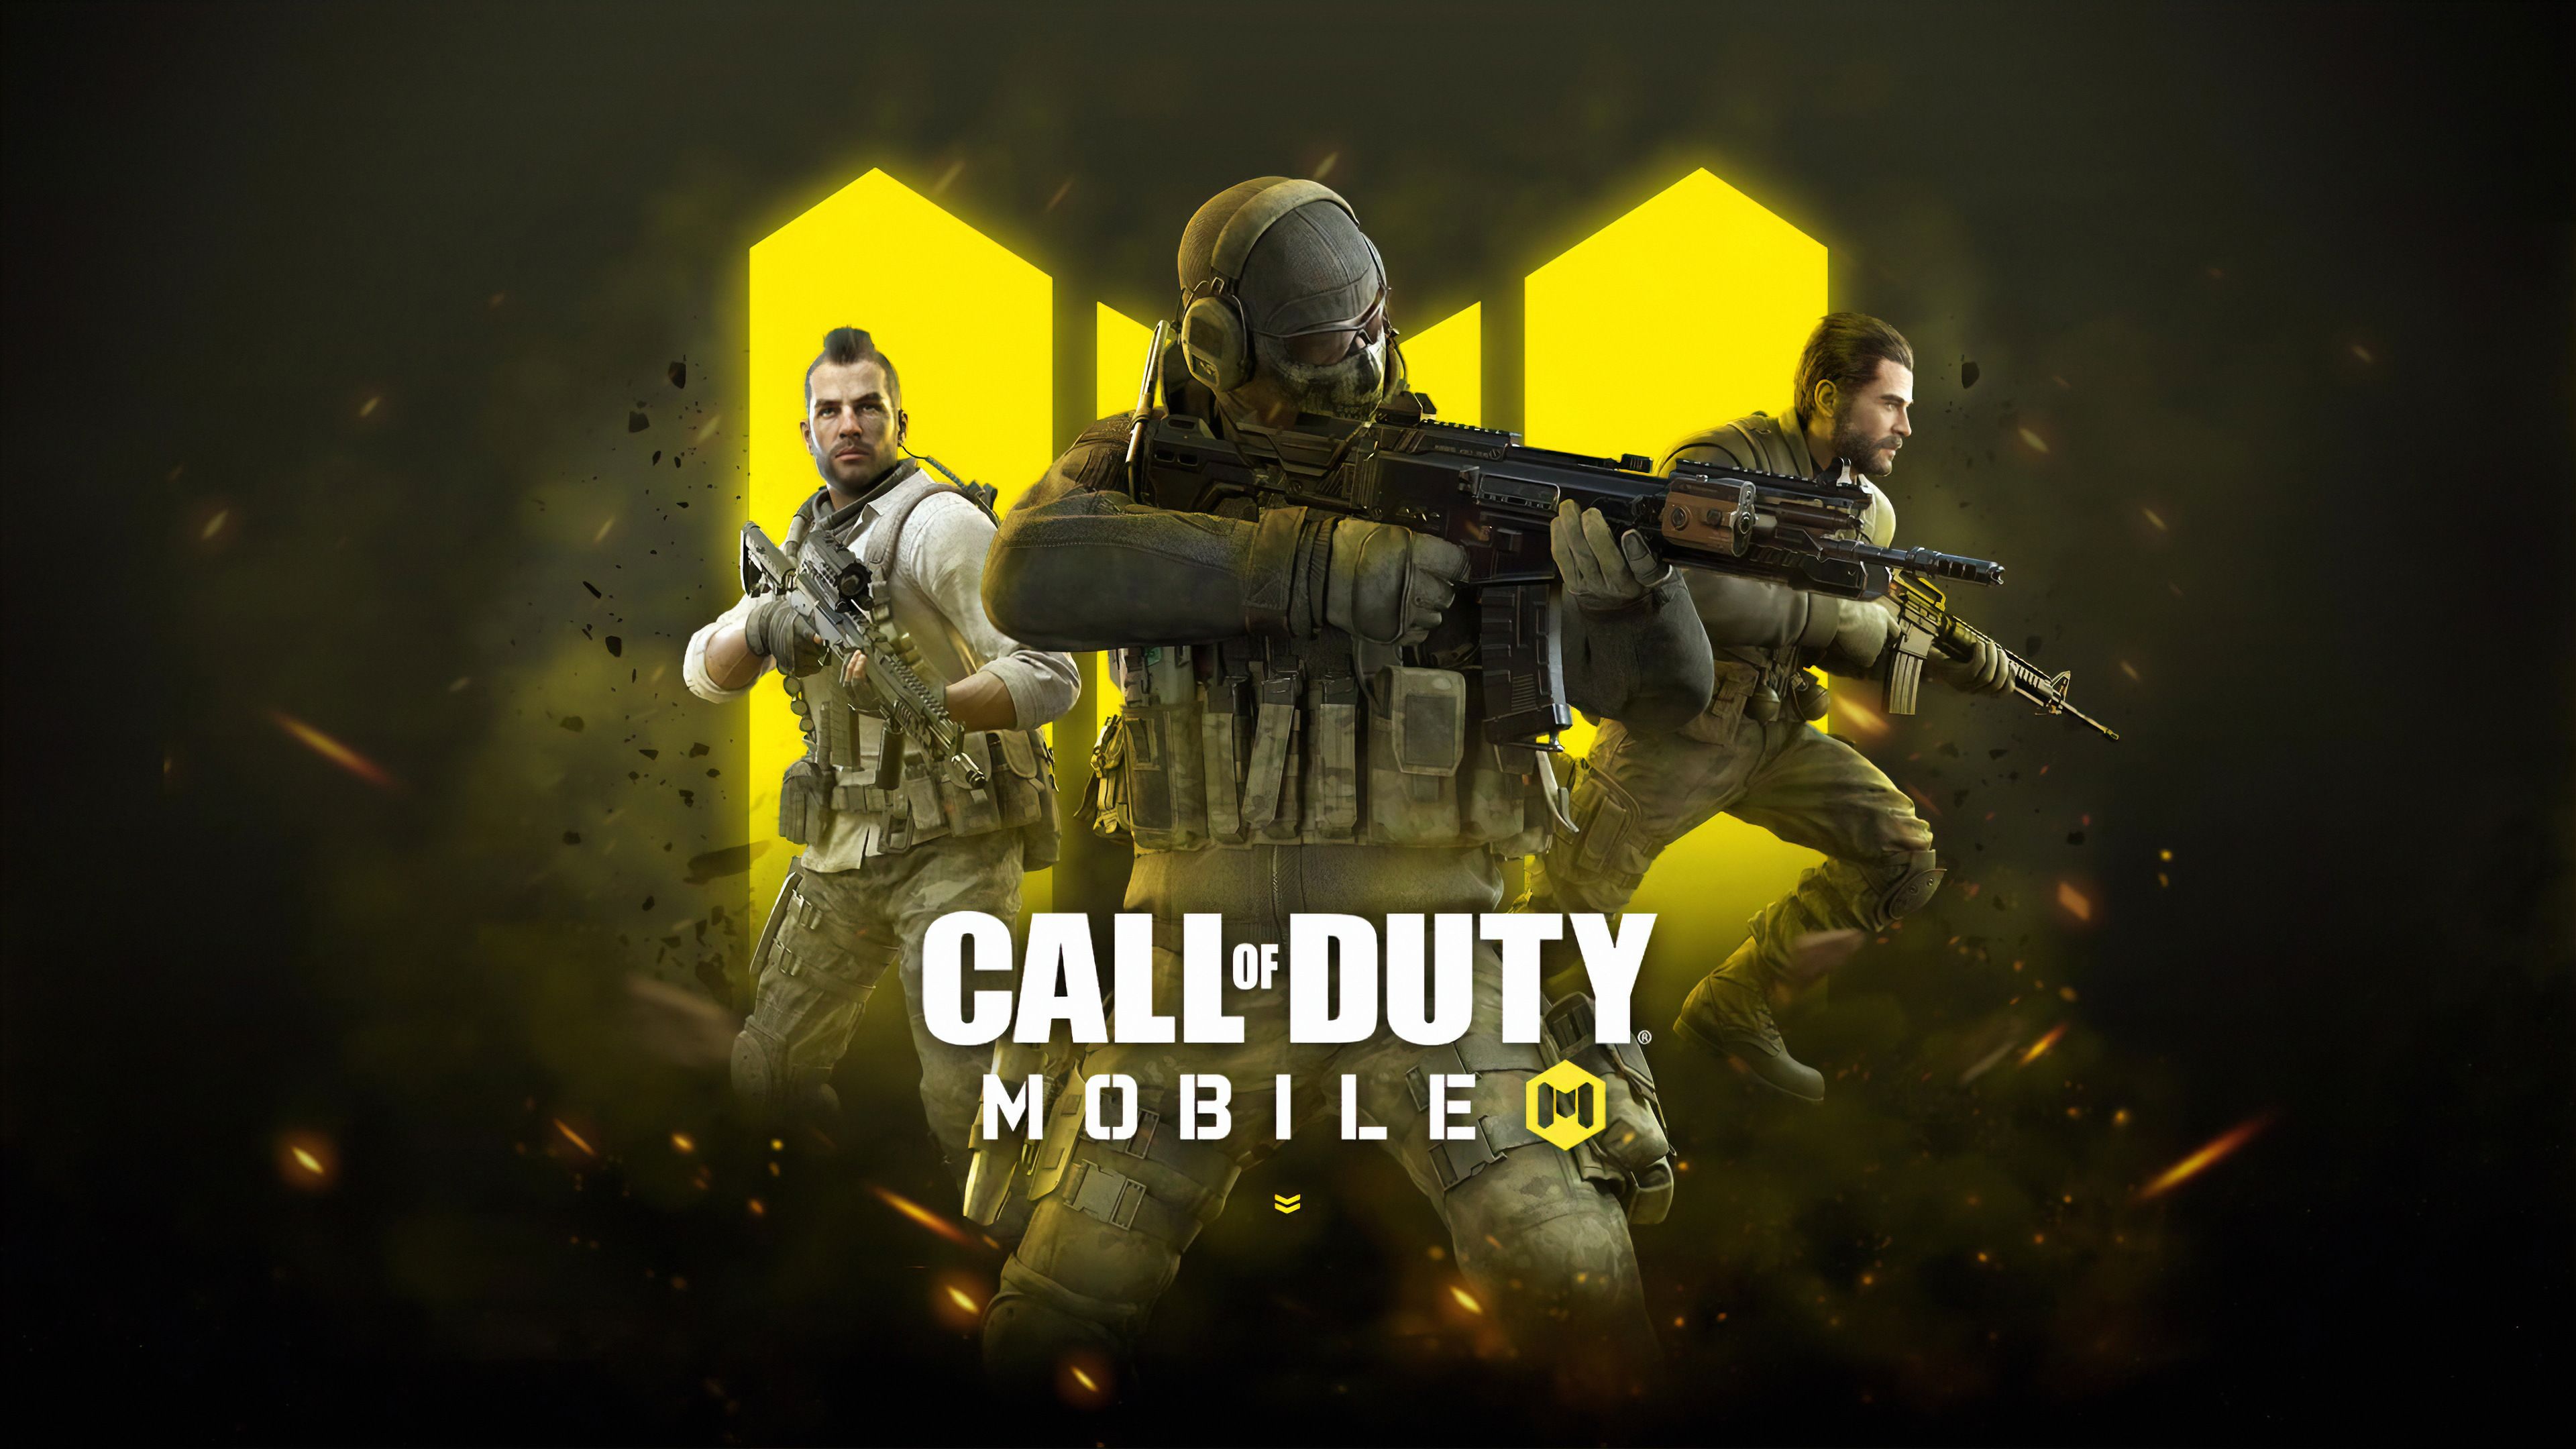 Call of Duty Mobile Logo Wallpaper Free Call of Duty Mobile Logo Background